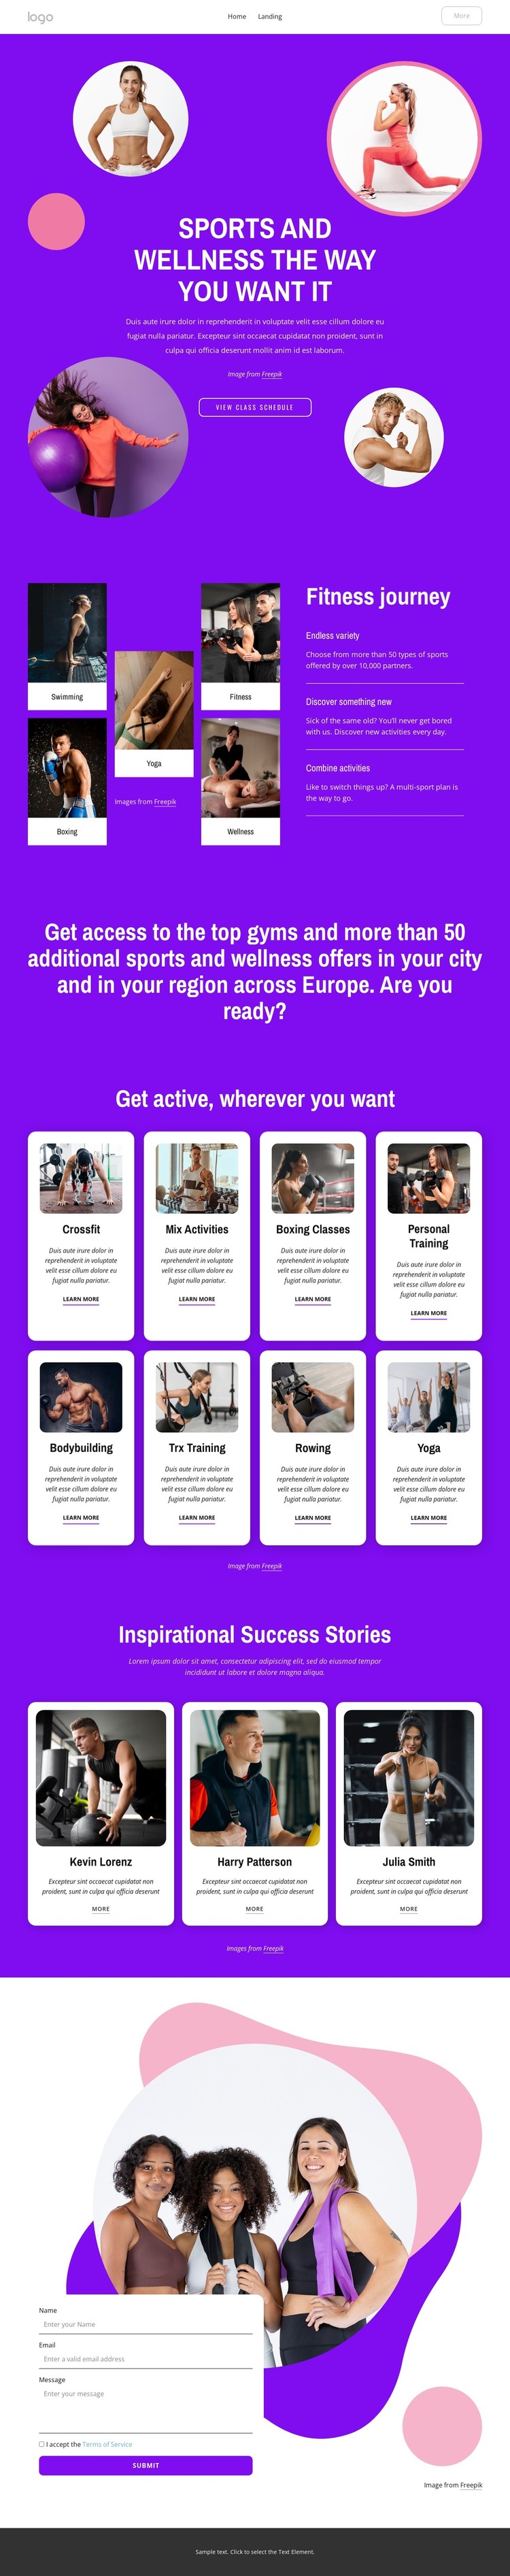 Sports and wellness the way you want it Web Design